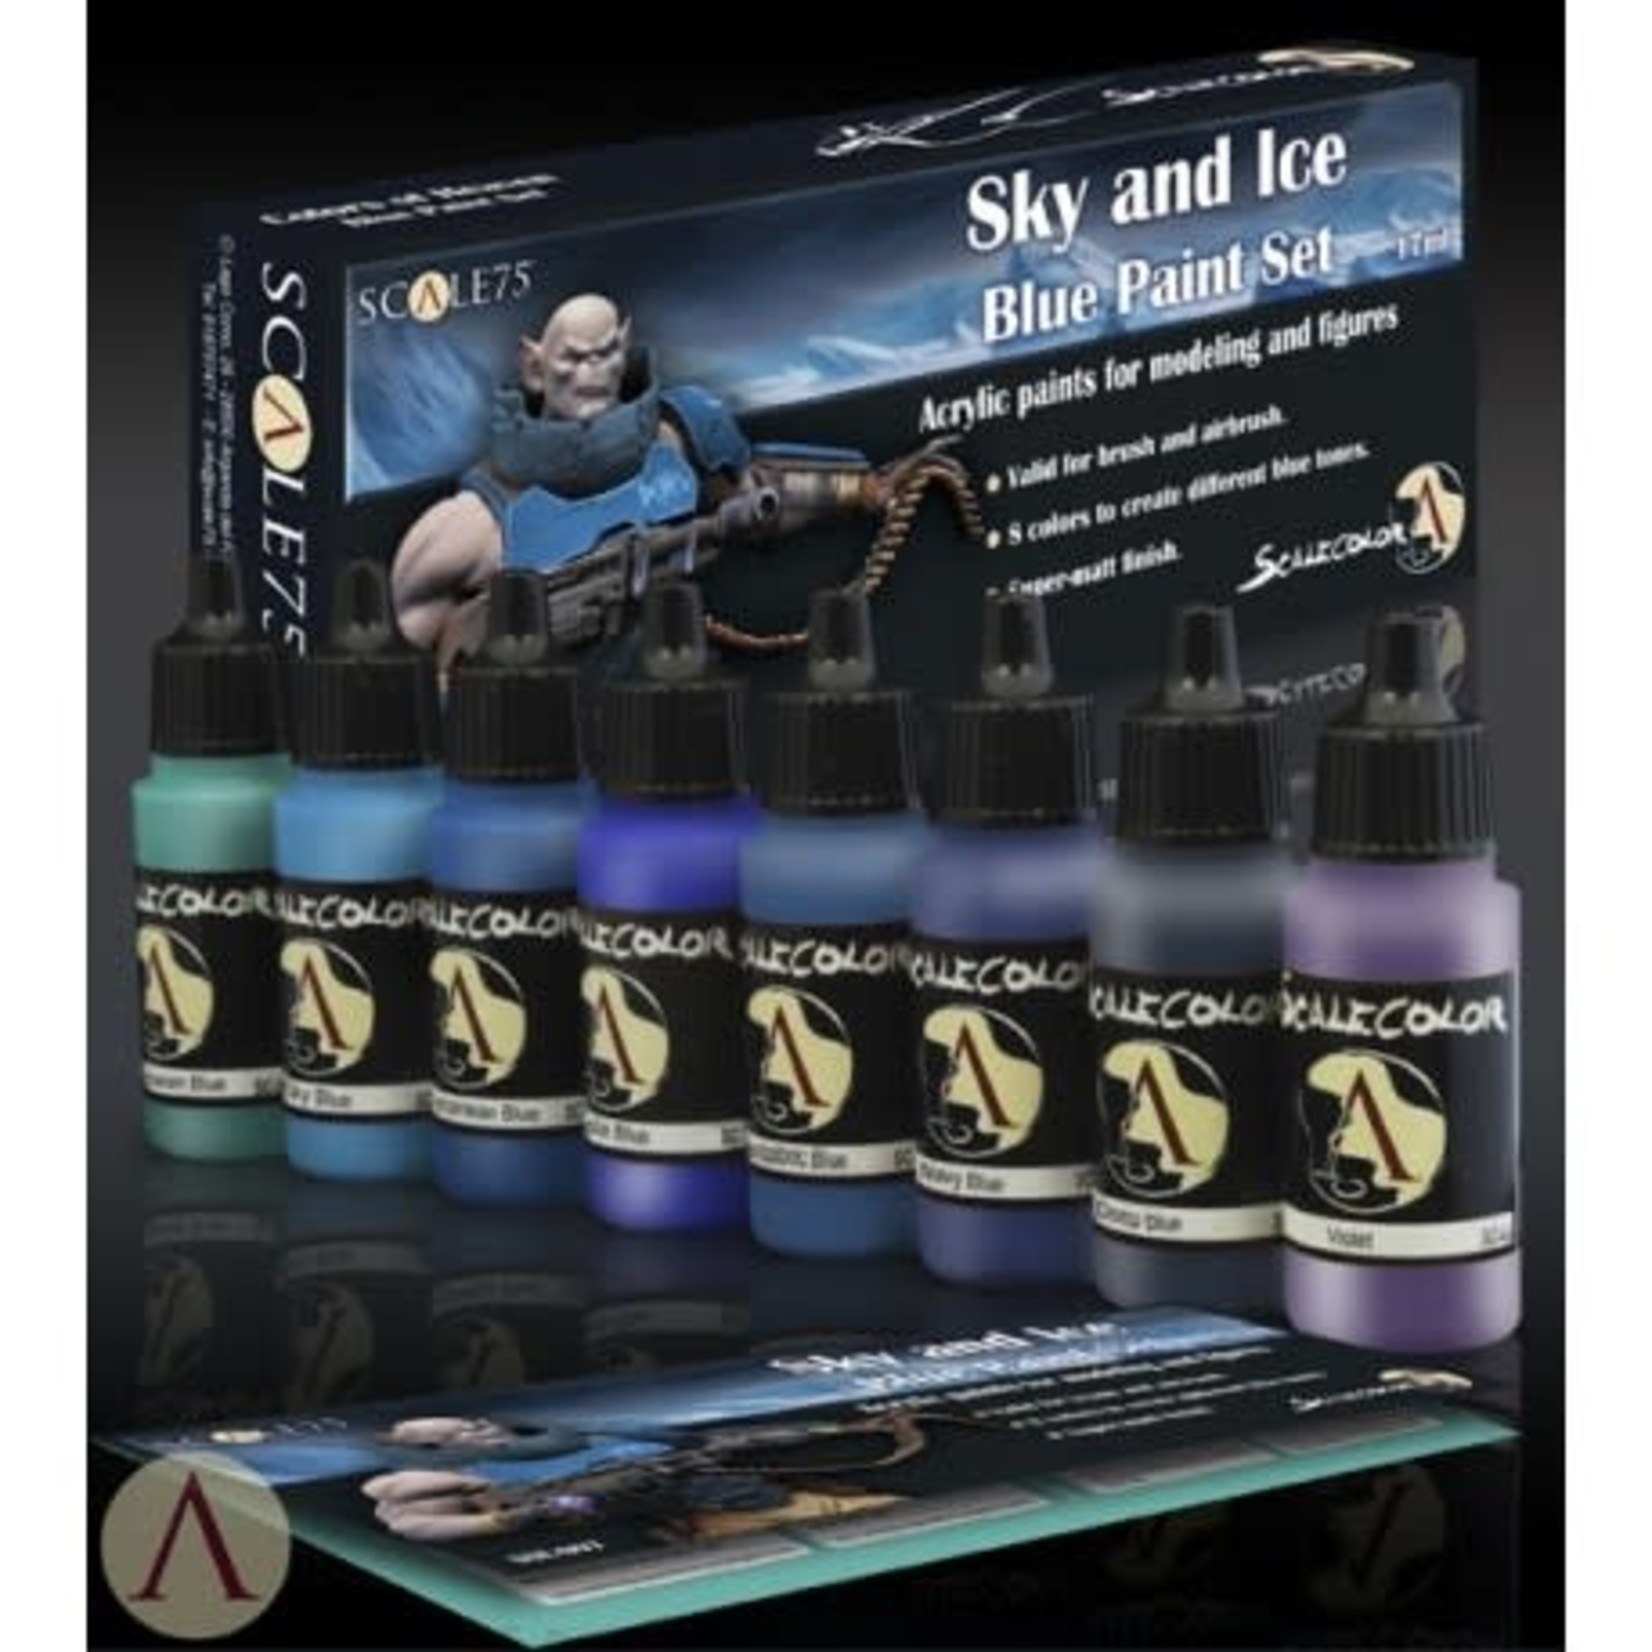 Scale 75 Scalecolor SSE007 Sky and Ice Blue Paint (8) Set